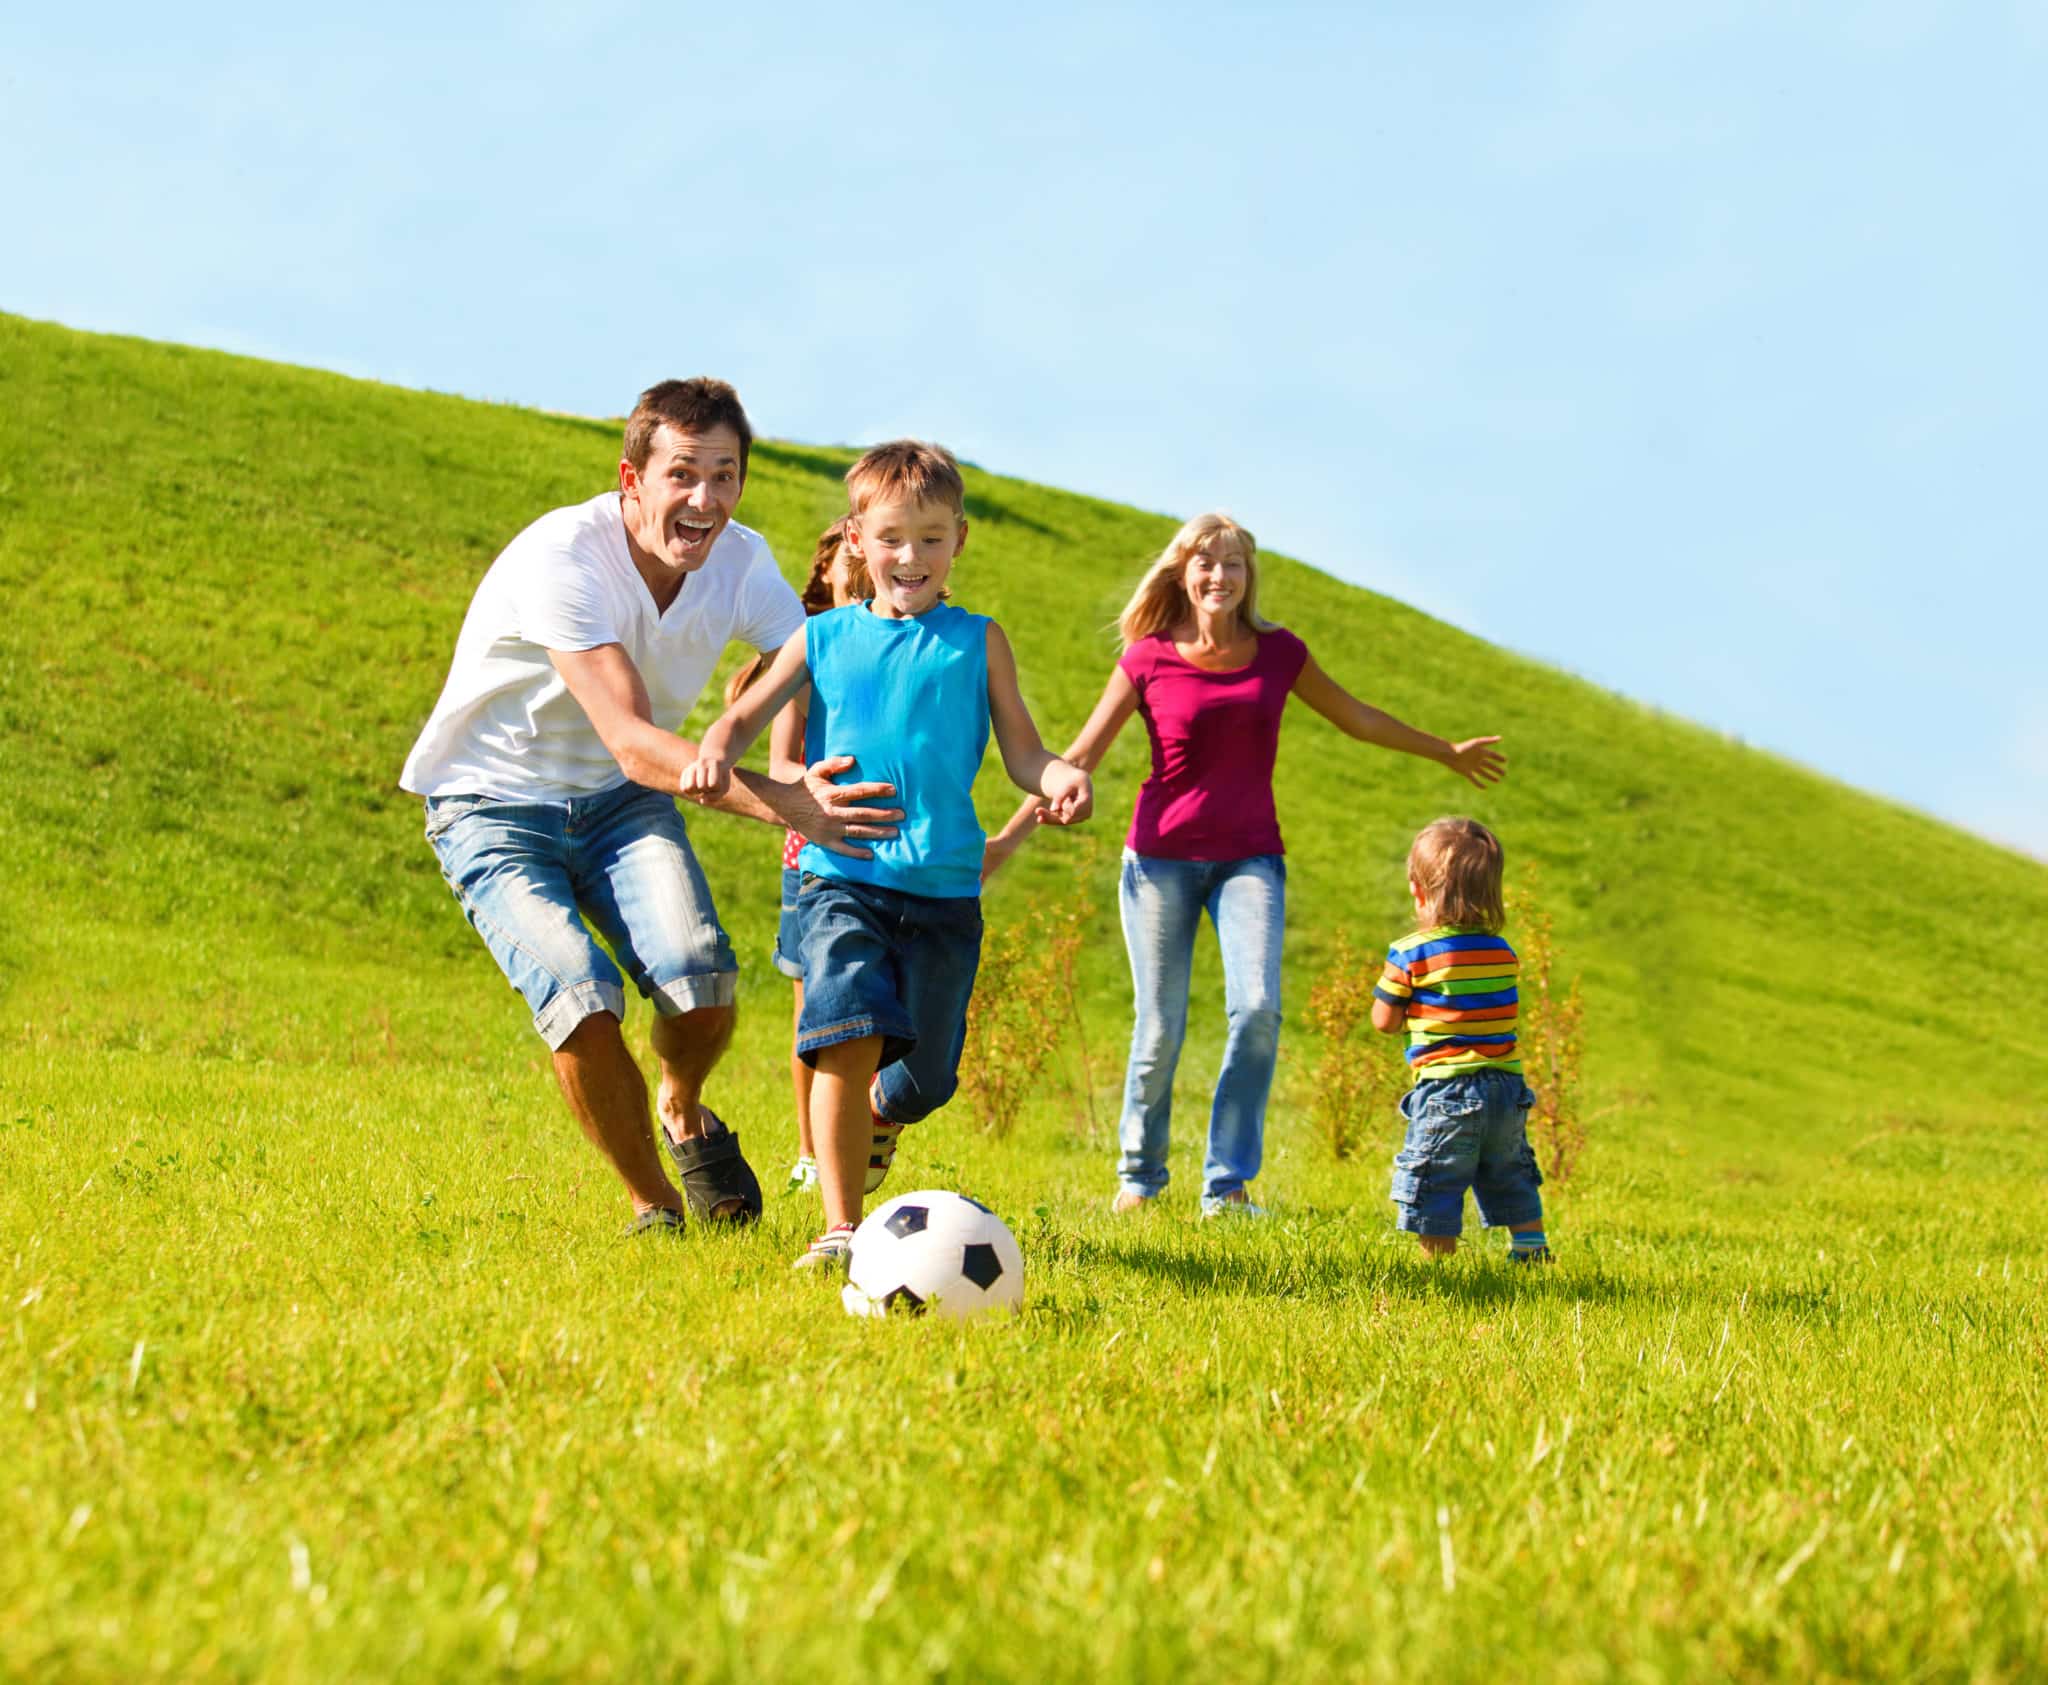 If you don't want to hear the dreaded, "I'm bored" this summer, check out our ultimate list of 45 healthy activities you can do with your kids this summer.